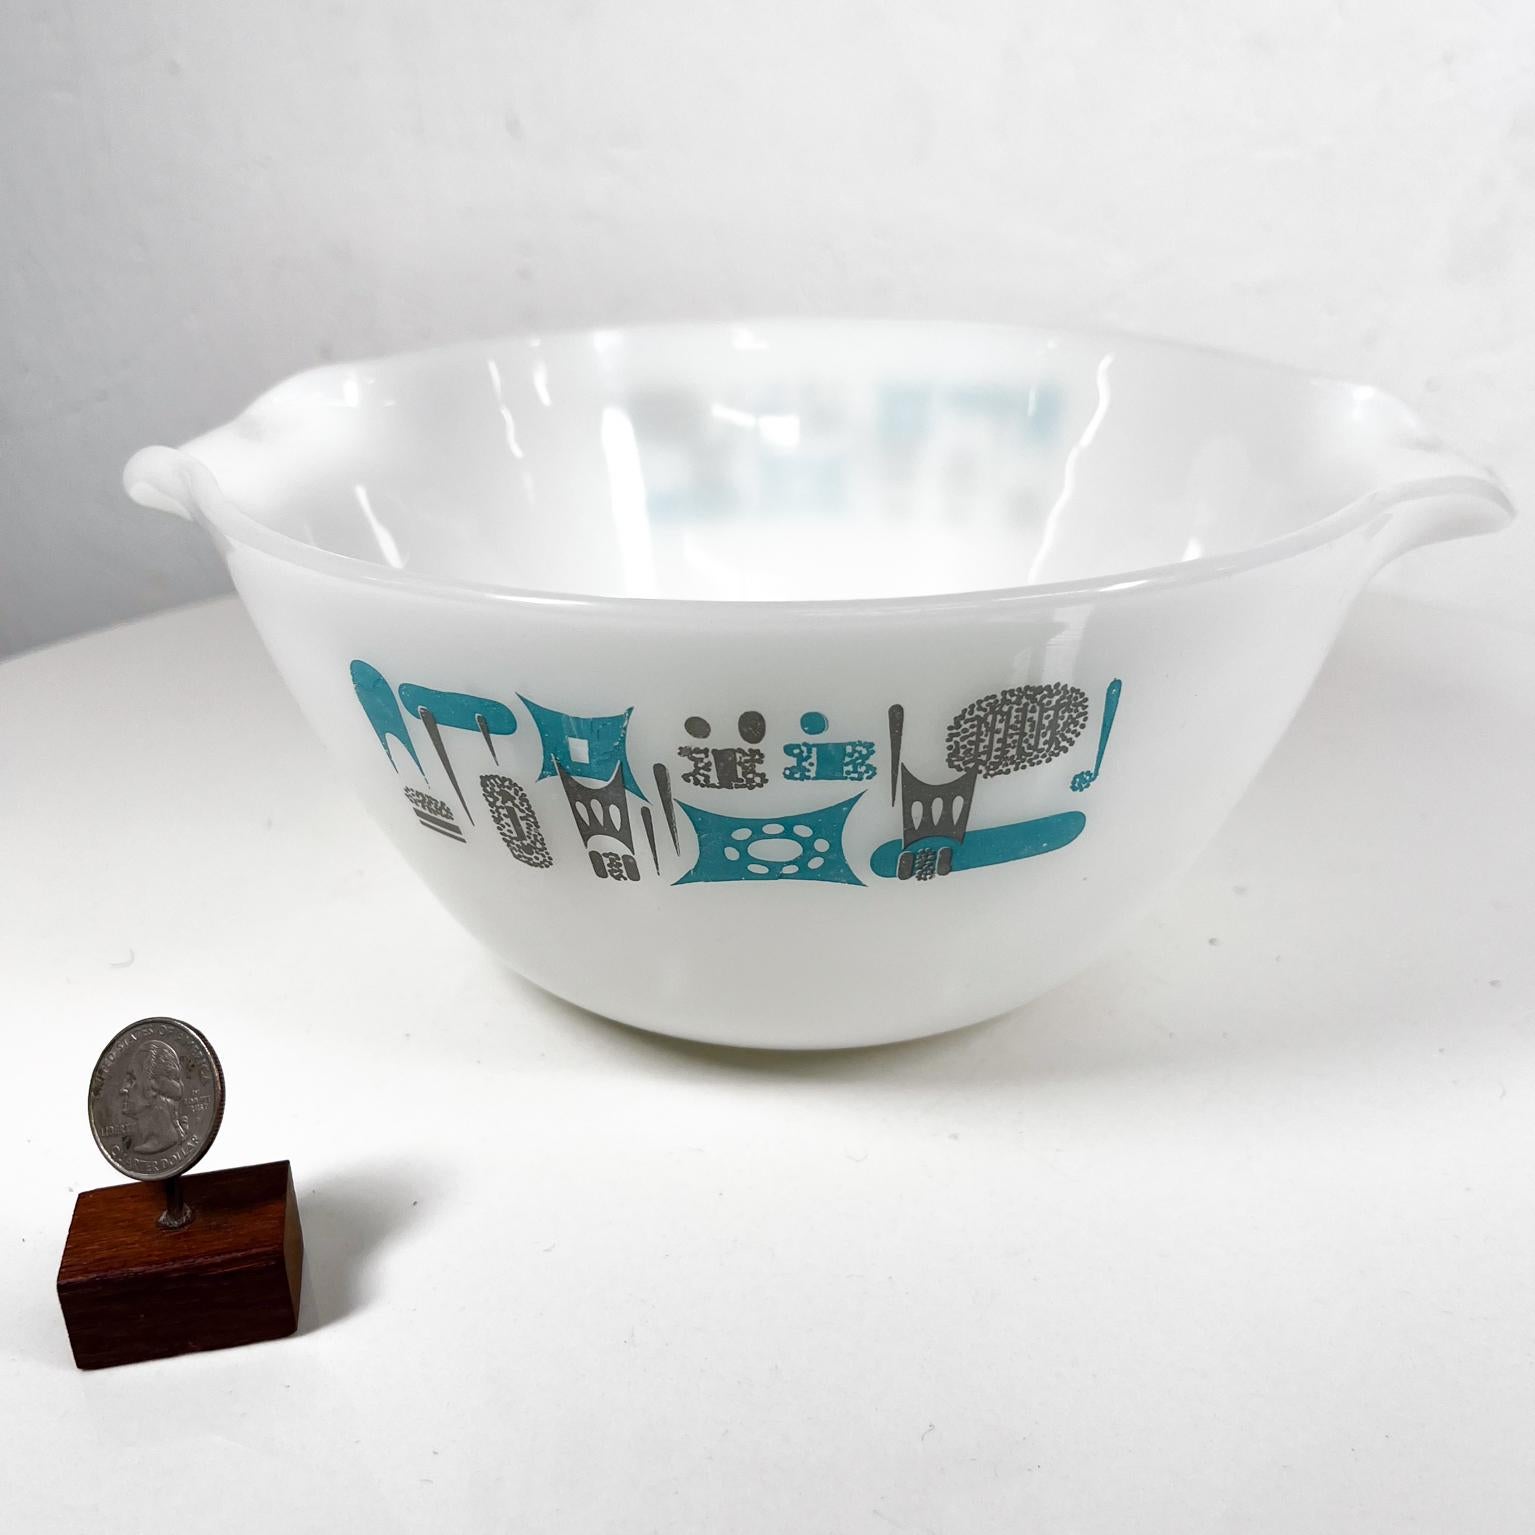 1960s Atomic Classic midcentury Mixing Bowl Marcrest Royal Blue Heaven
USA
Milk Glass
Style of Corning Ware Pyrex
10.25 w x 8.75 d x 4.38 h
Preowned vintage, review images.